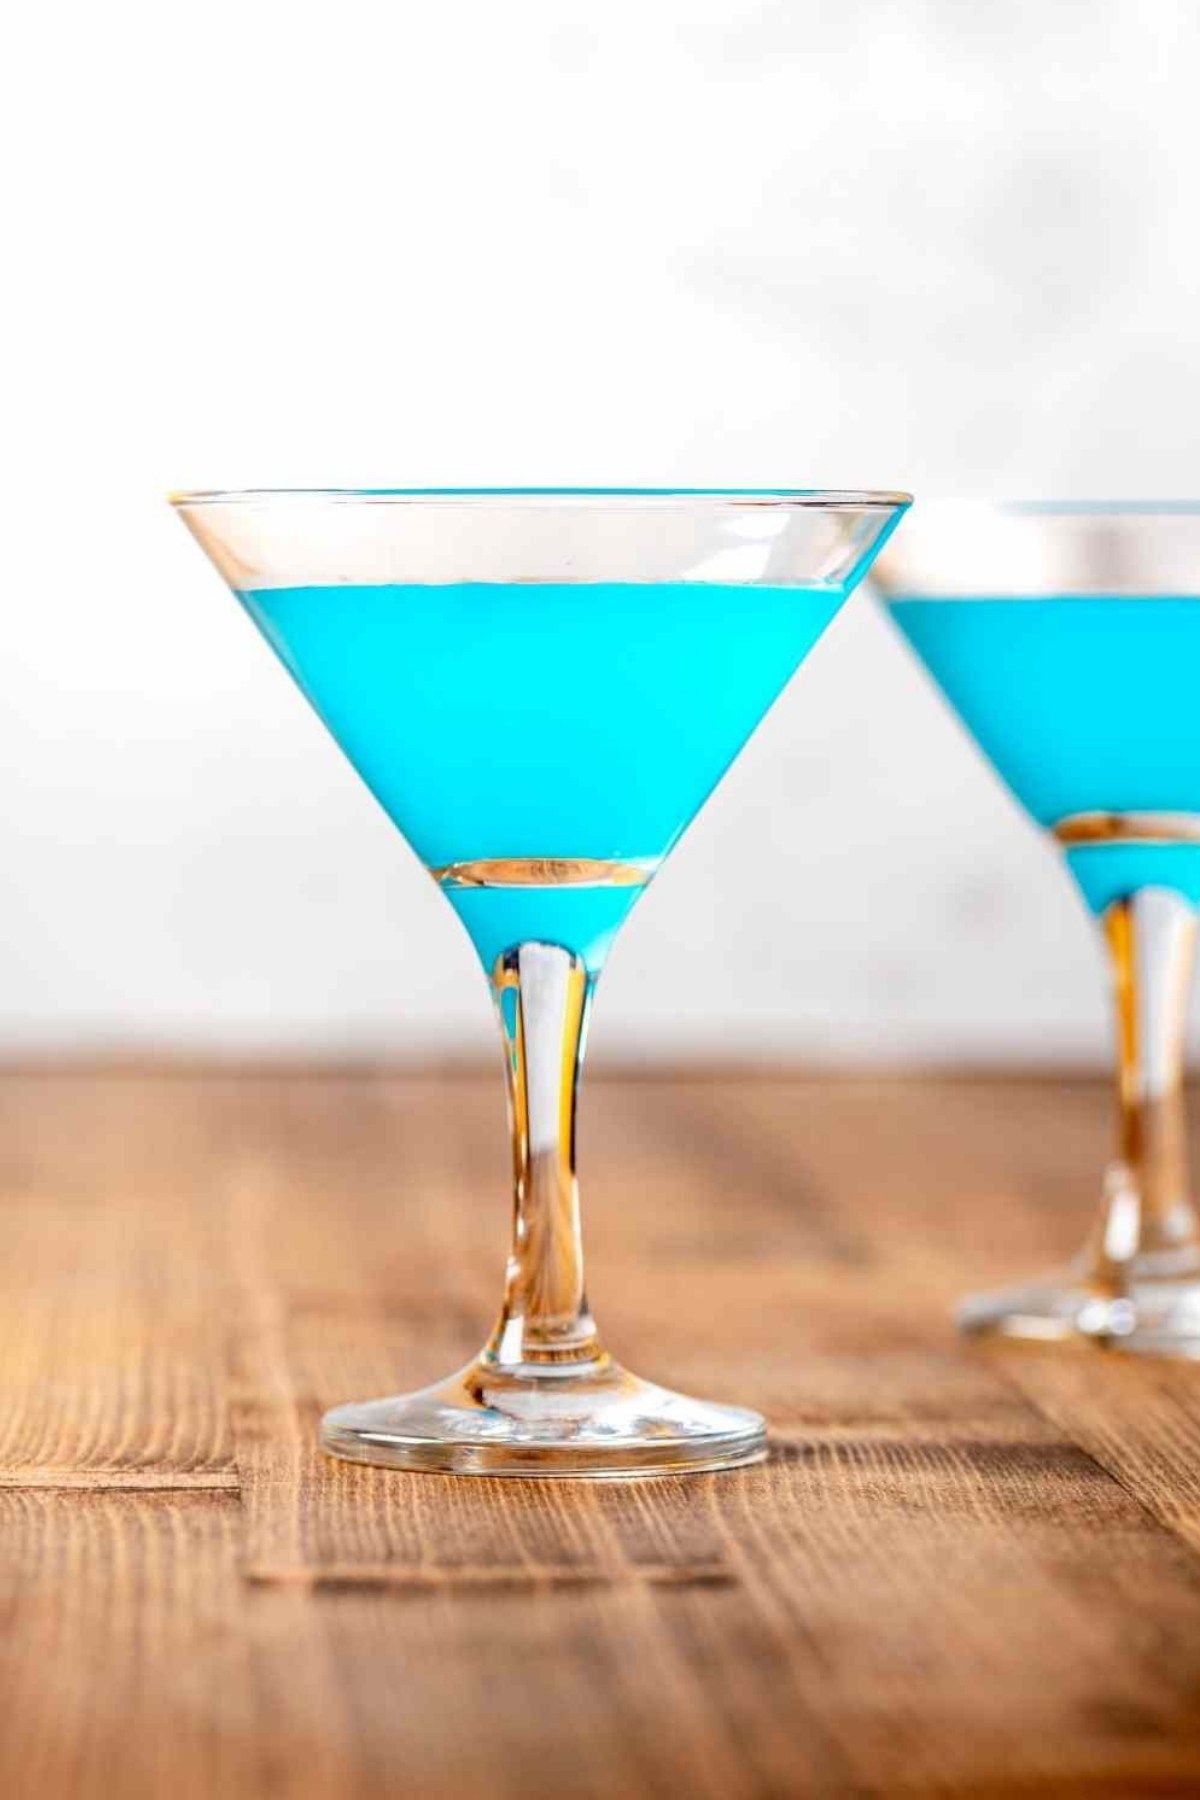 This may just be the coolest cocktail you’ve ever made! The Hypnotic Cocktail is just as electrifying as it appears. Its fun, bright color stands out on a drink menu, making it a popular choice at restaurants and bars. Now, you can recreate this Hpnotiq drink at home for your next bachelor party or games night.